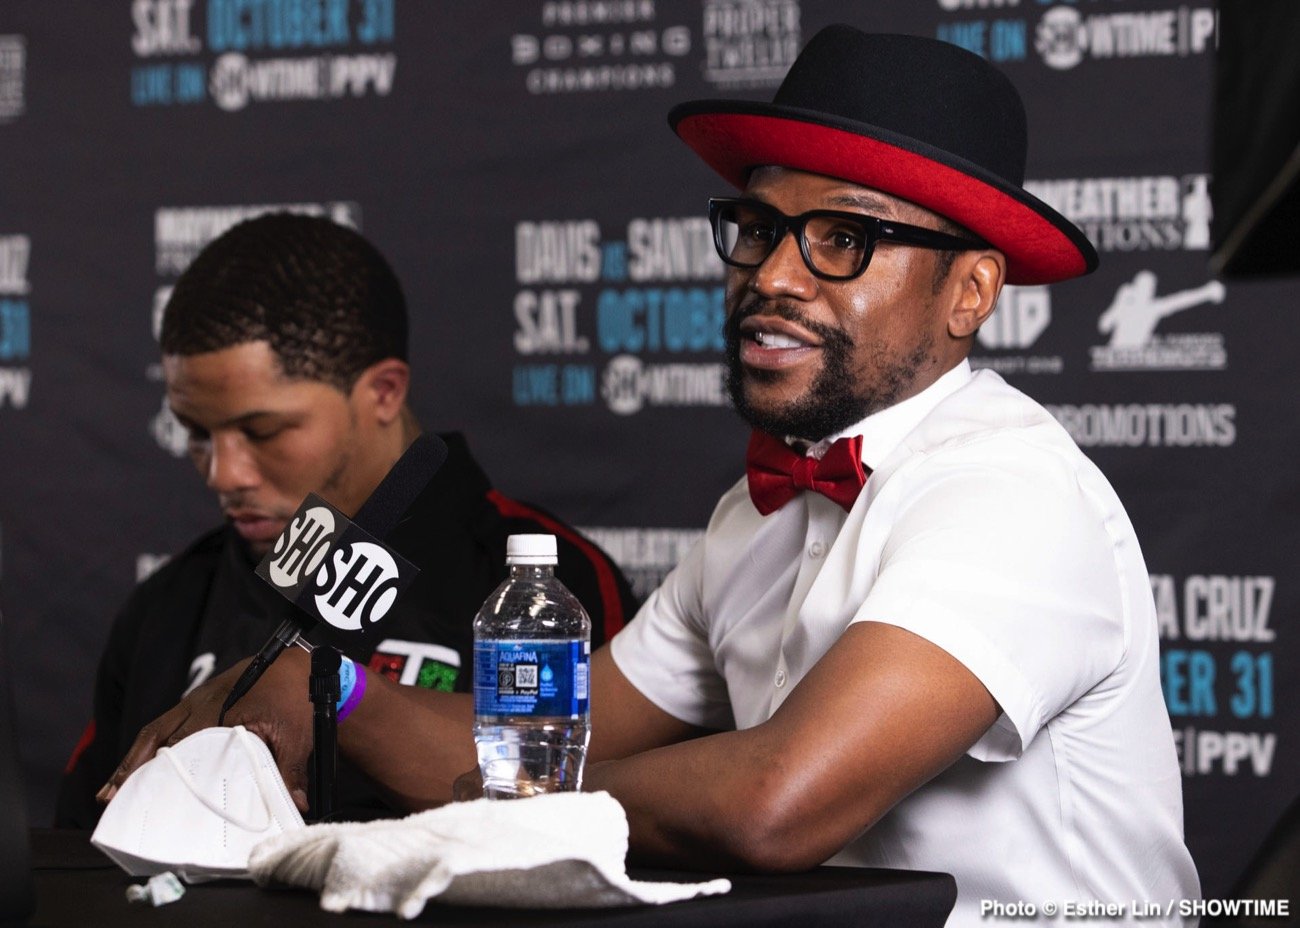 Tank Davis is the &quot;Top dog&quot; says Floyd Mayweather ⋆ Boxing News 24